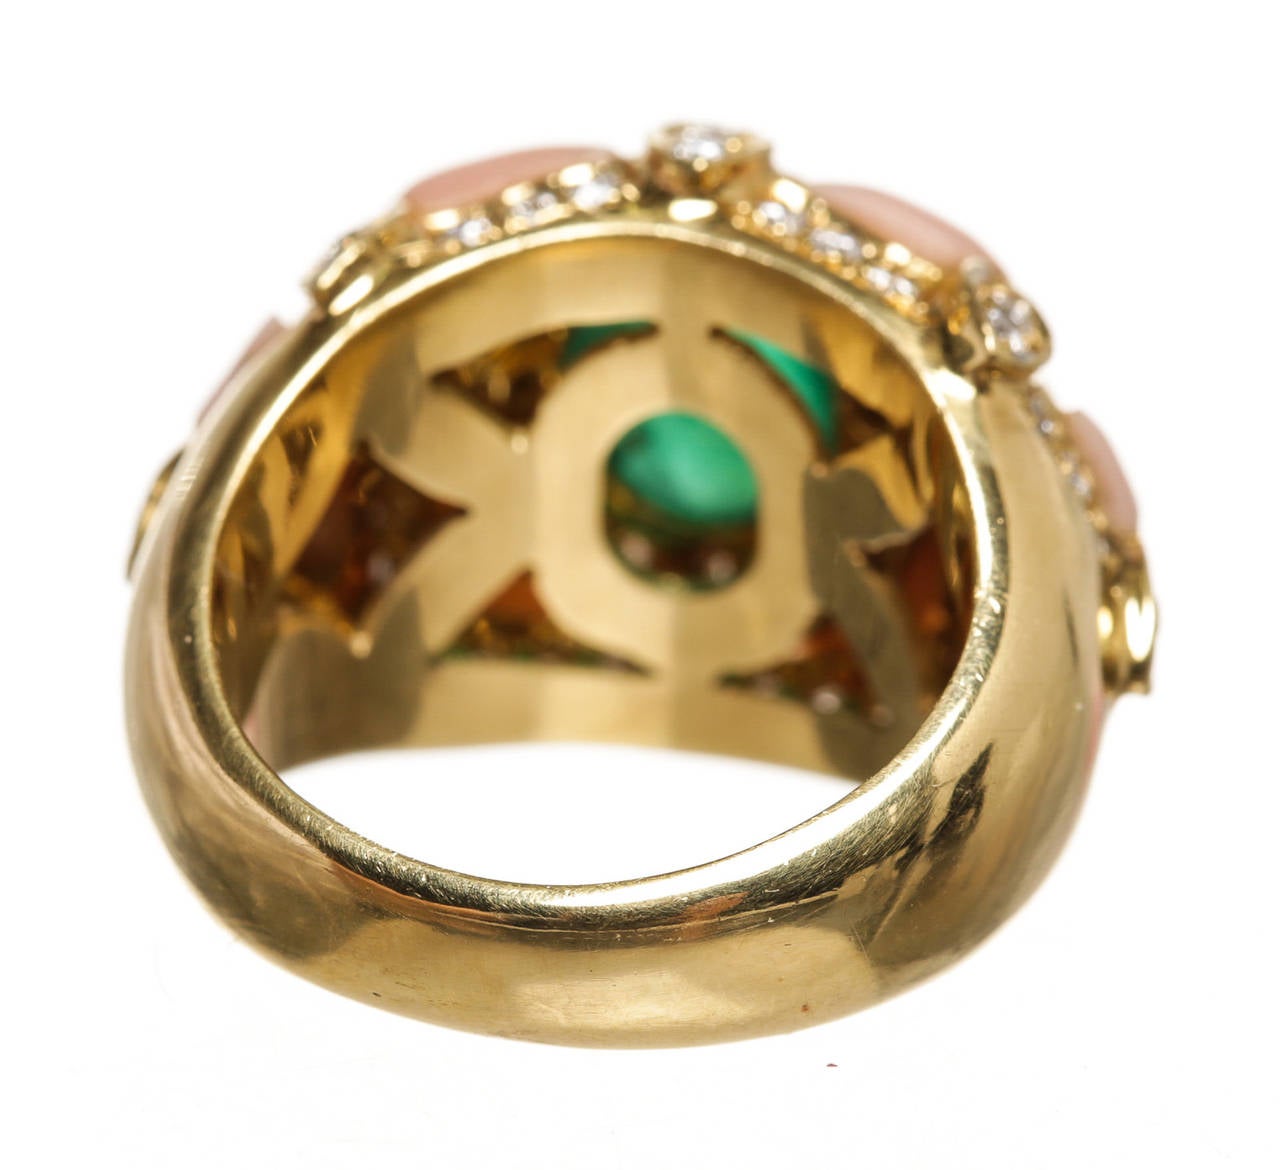 Show off your signature style with this beautiful Gold Diamond and Cabochon Emerald Ring.

The ring weighs approximately 19.2 grams.  The ring tapers from 18.00mm to 5.00mm.  

Bezel set is 1 Oval Cabochon Cut Emerald of medium dark green color